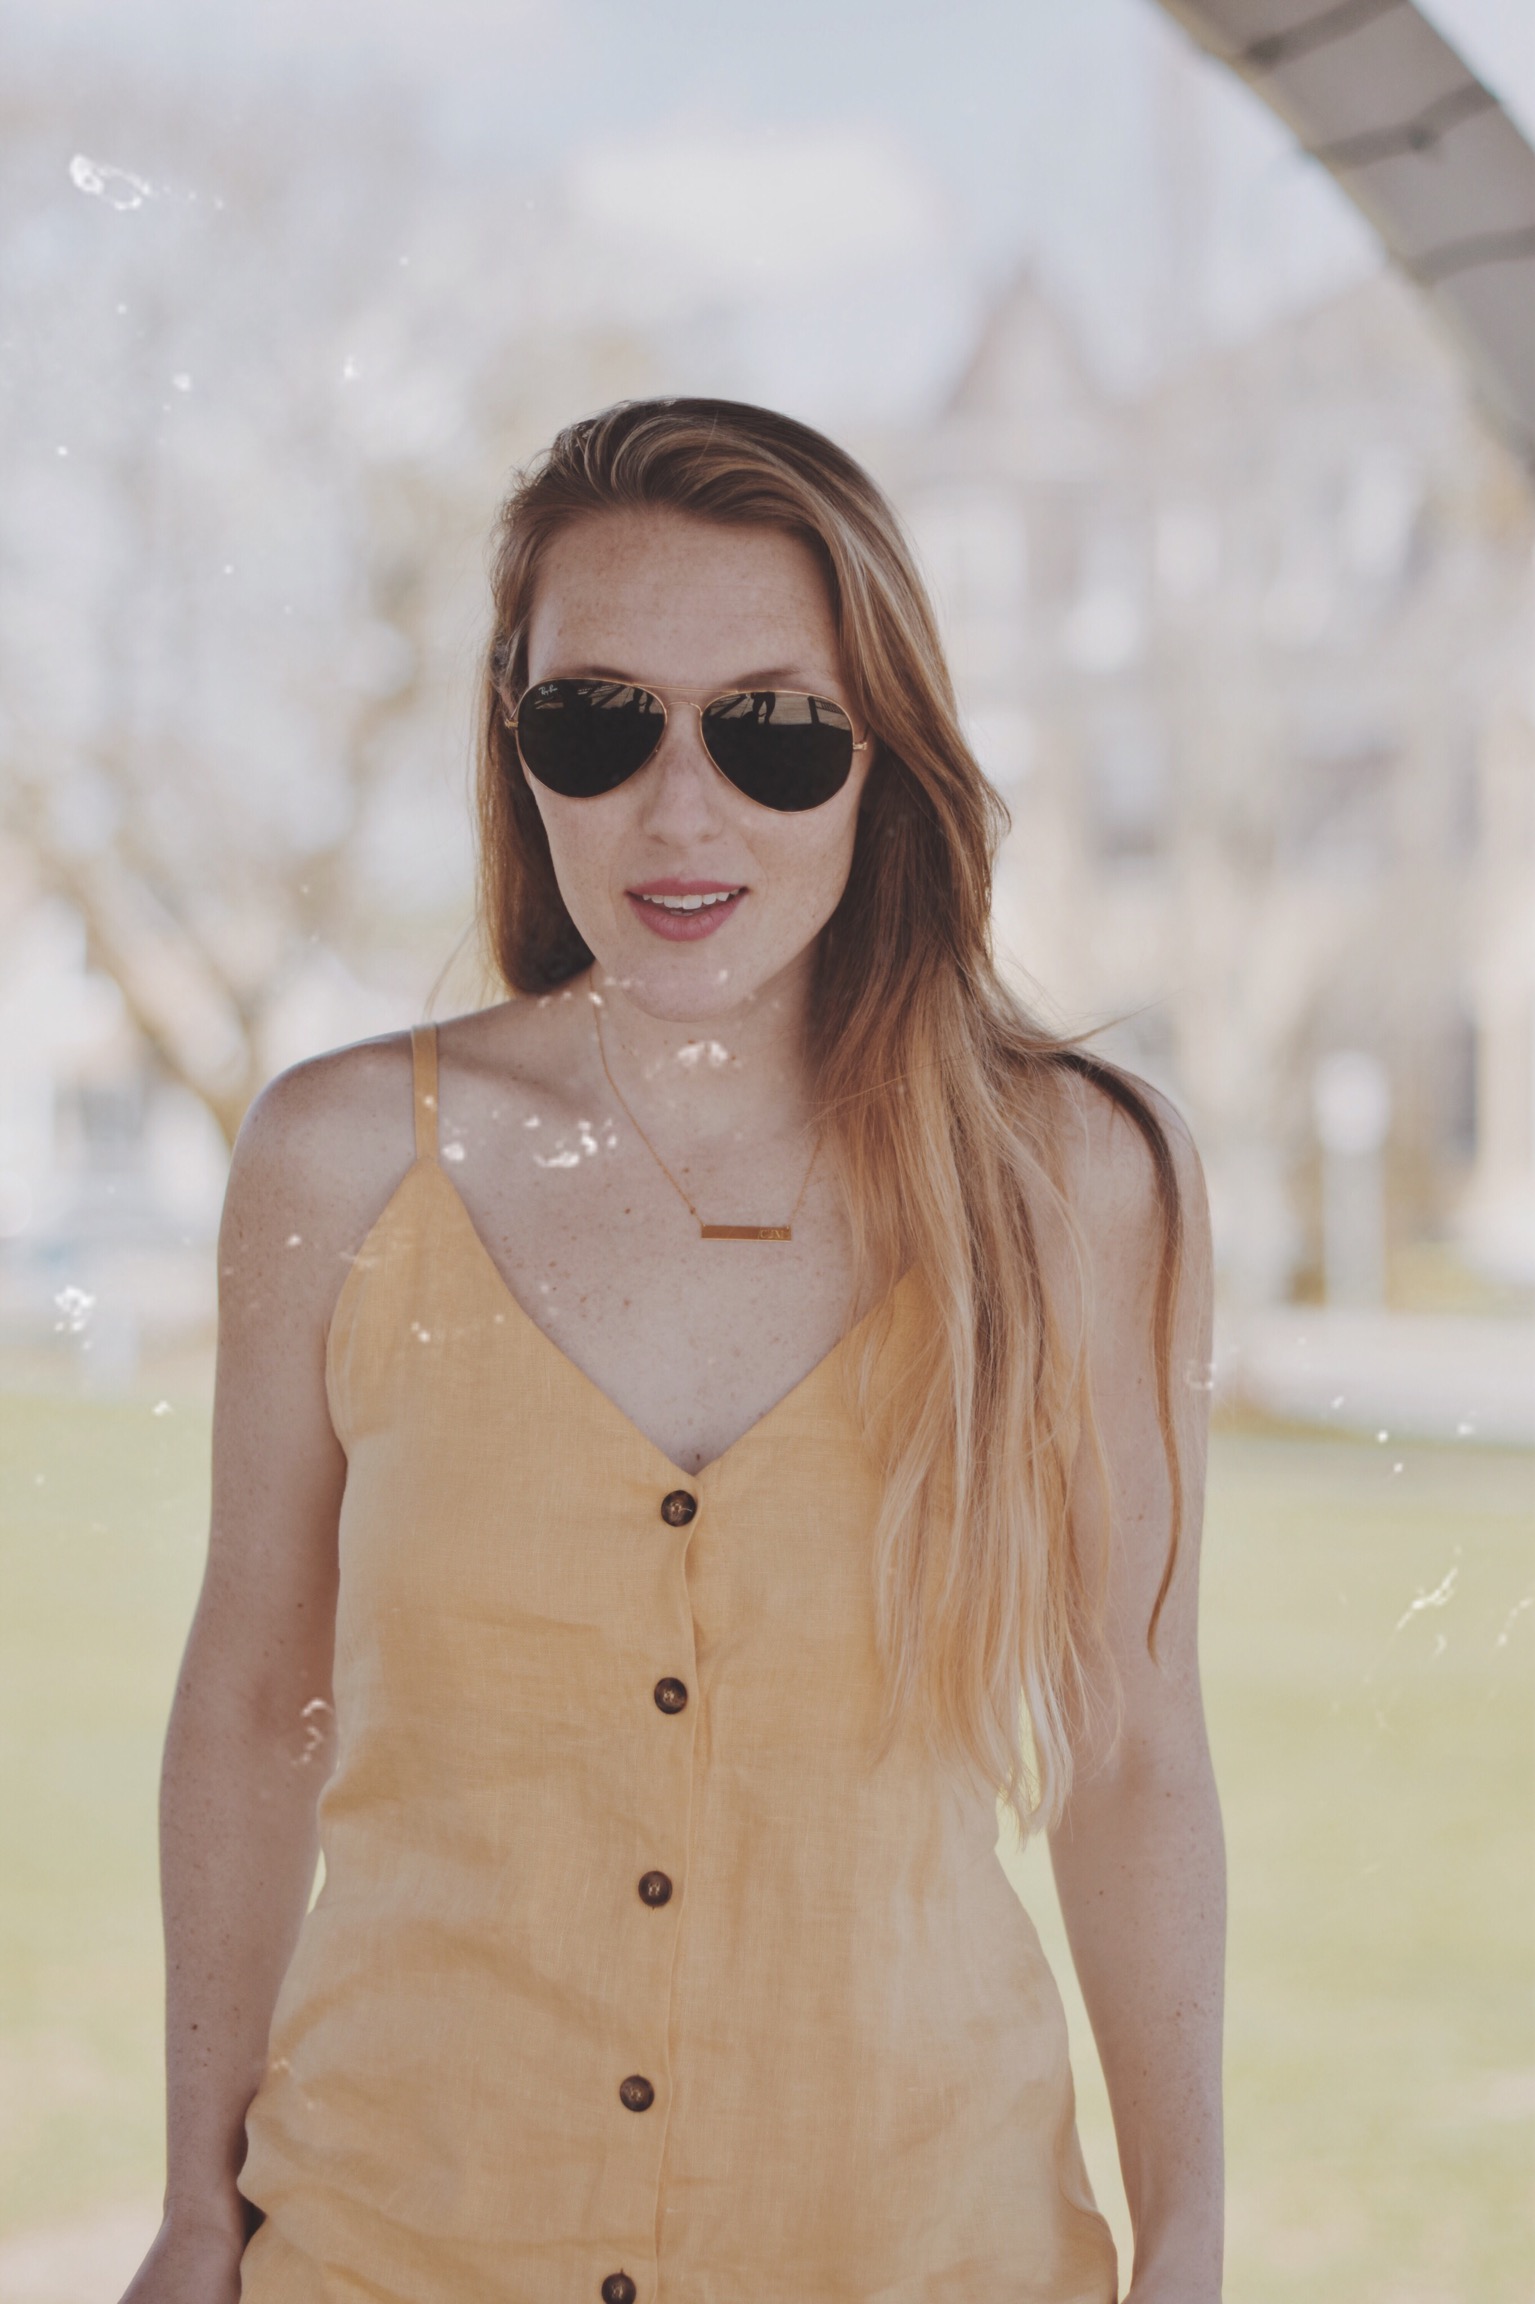 styling a canary yellow linen dress from Reformation as part of my summer capsule wardrobe of ethical fashion brands